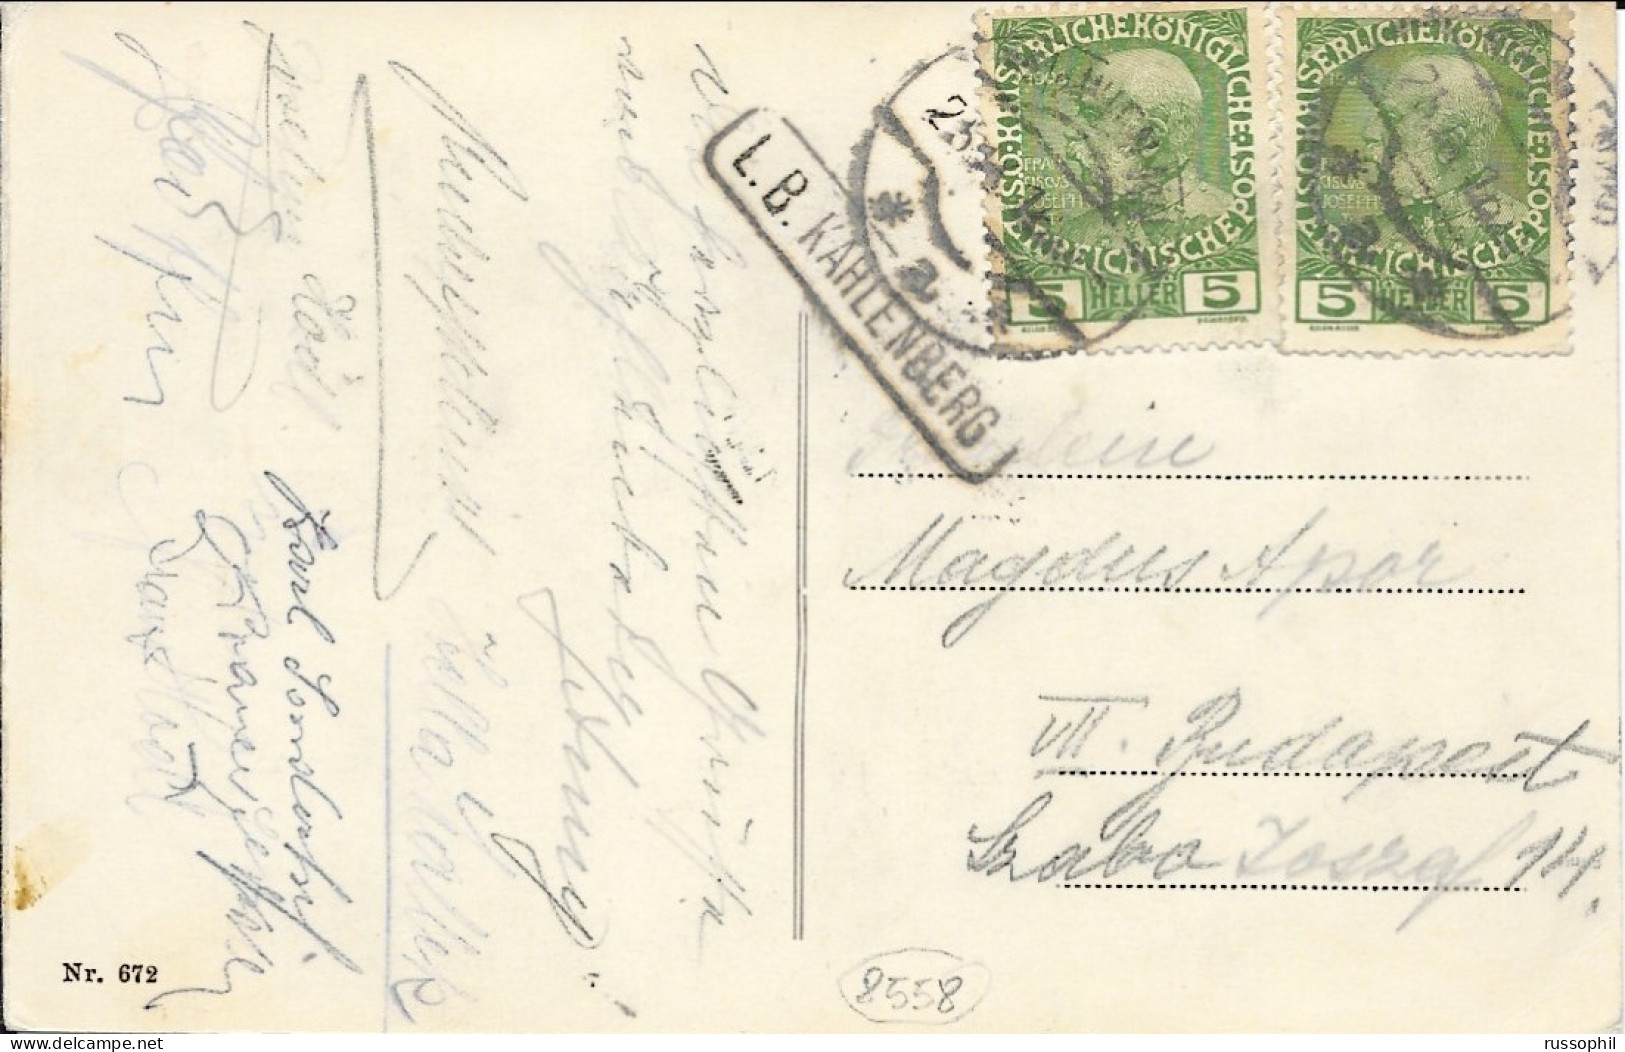 AUSTRIA - RAILWAYS STATION "L.B. KAHLENBERG" BOXED MARK ON FRANKED PC (VIEW OF KAHLENBERG) TO HUNGARY - 1916 - Covers & Documents